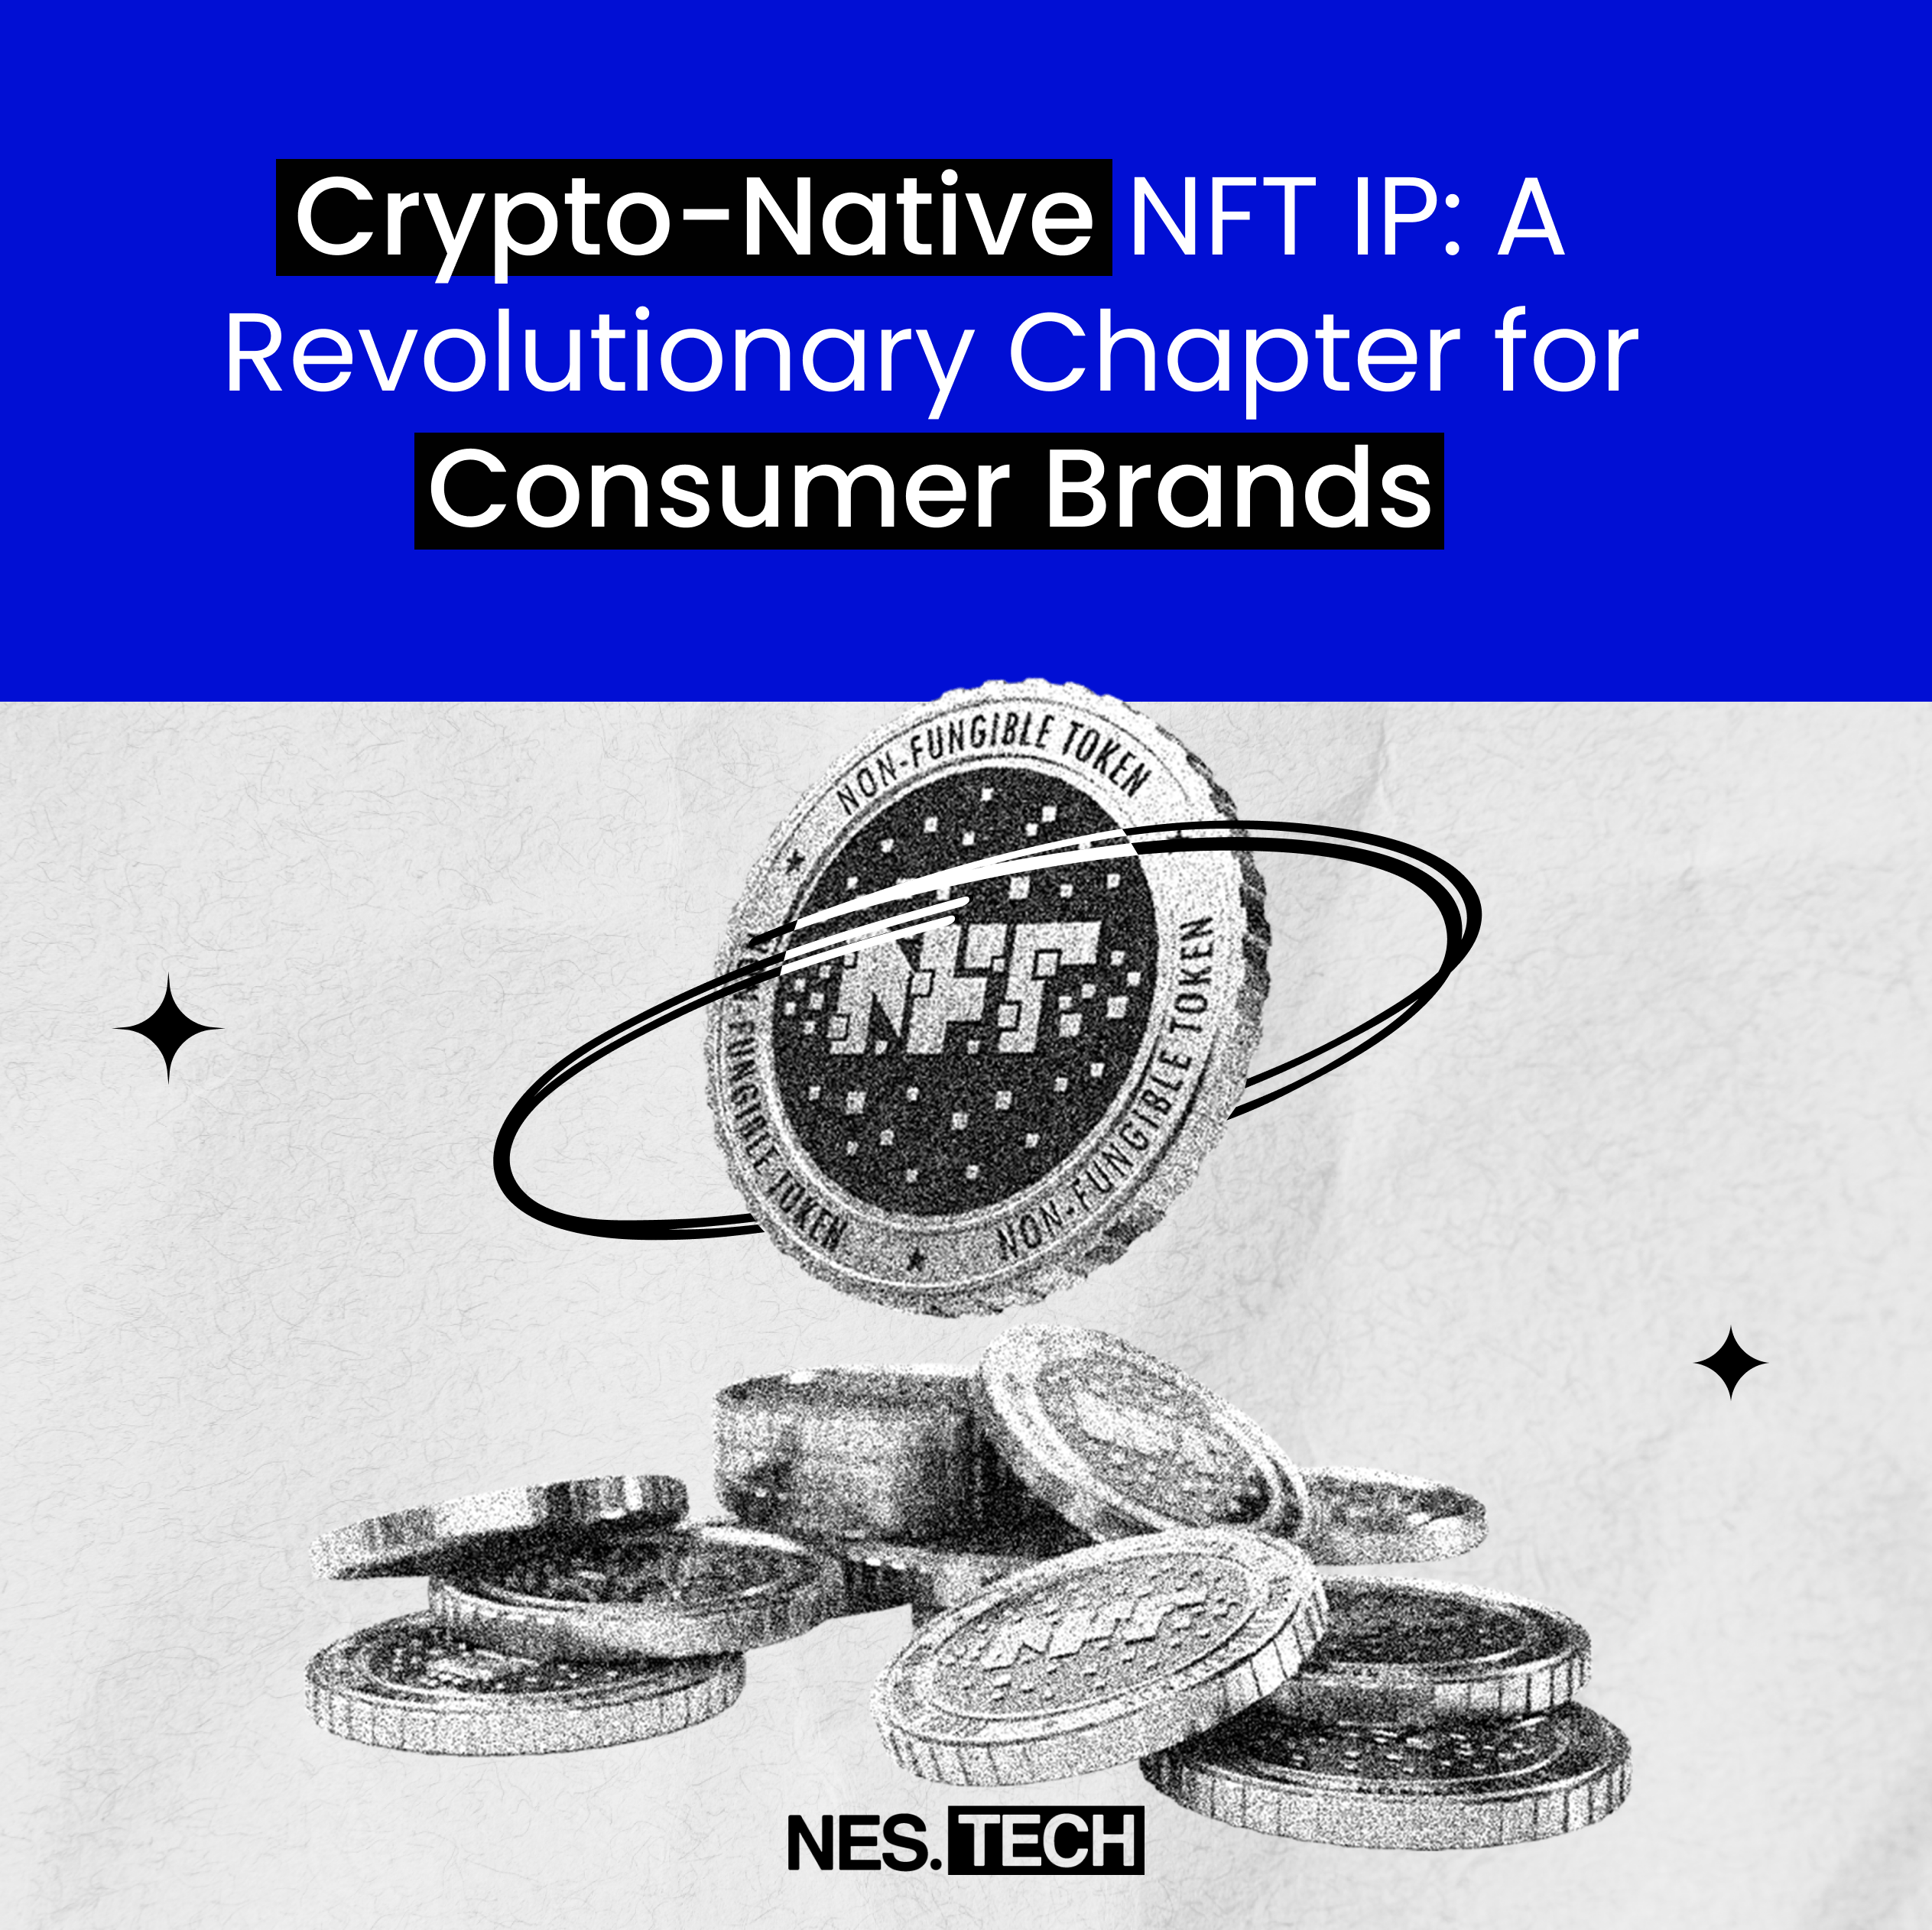 Crypto-Native NFT IP: A Revolutionary Chapter for Consumer Brands